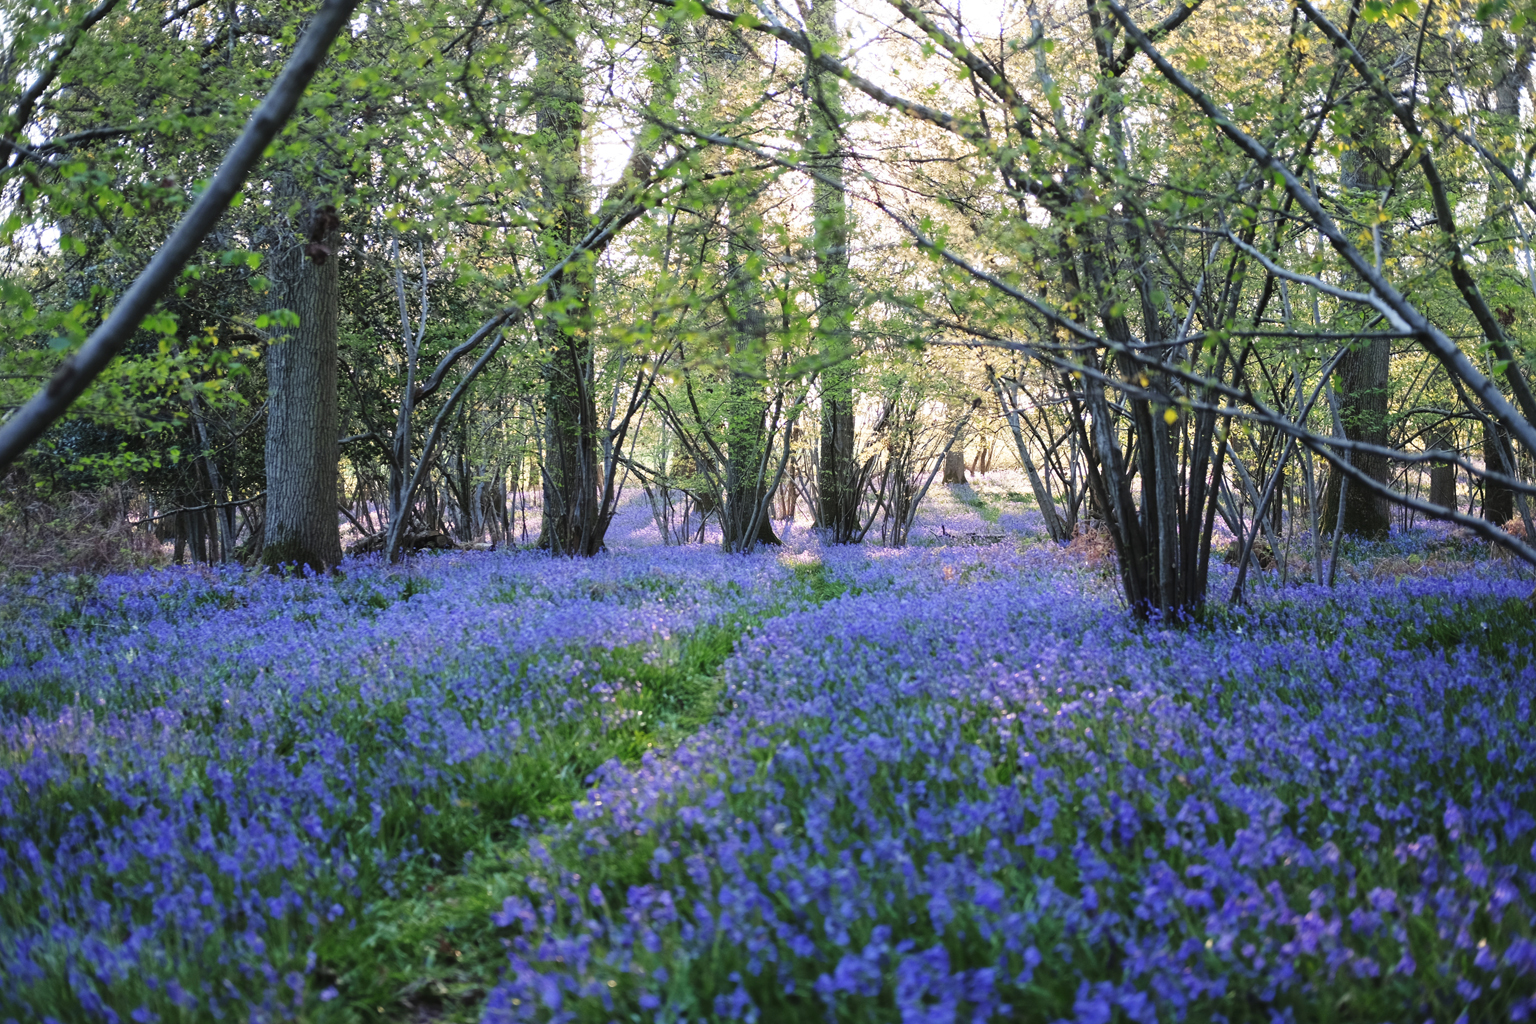   Bluebell explosion to greet us on our return home  